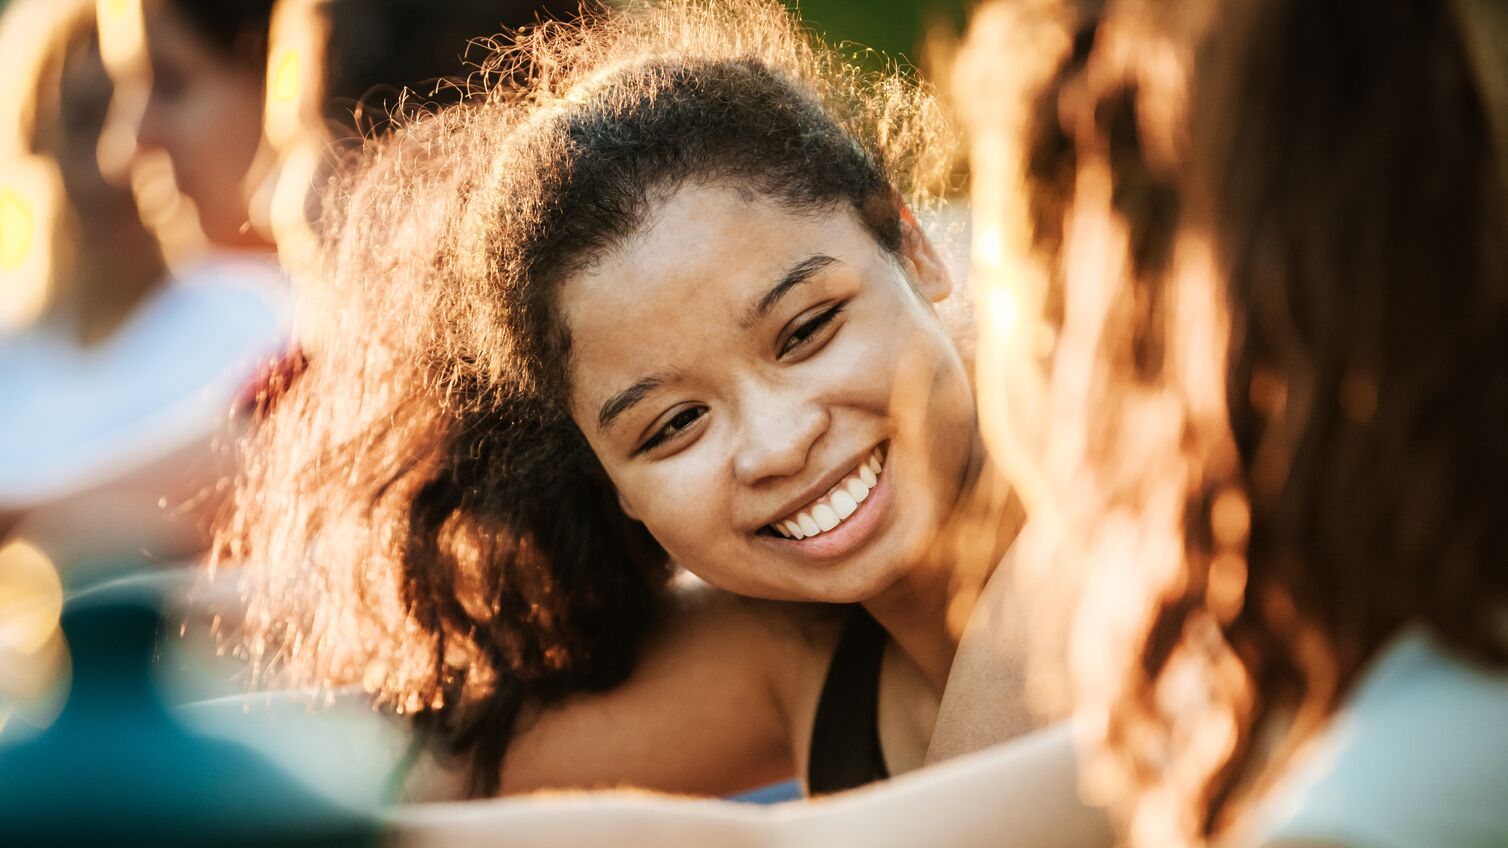 A young woman smiling while out with her fitness group, warming up before a run.